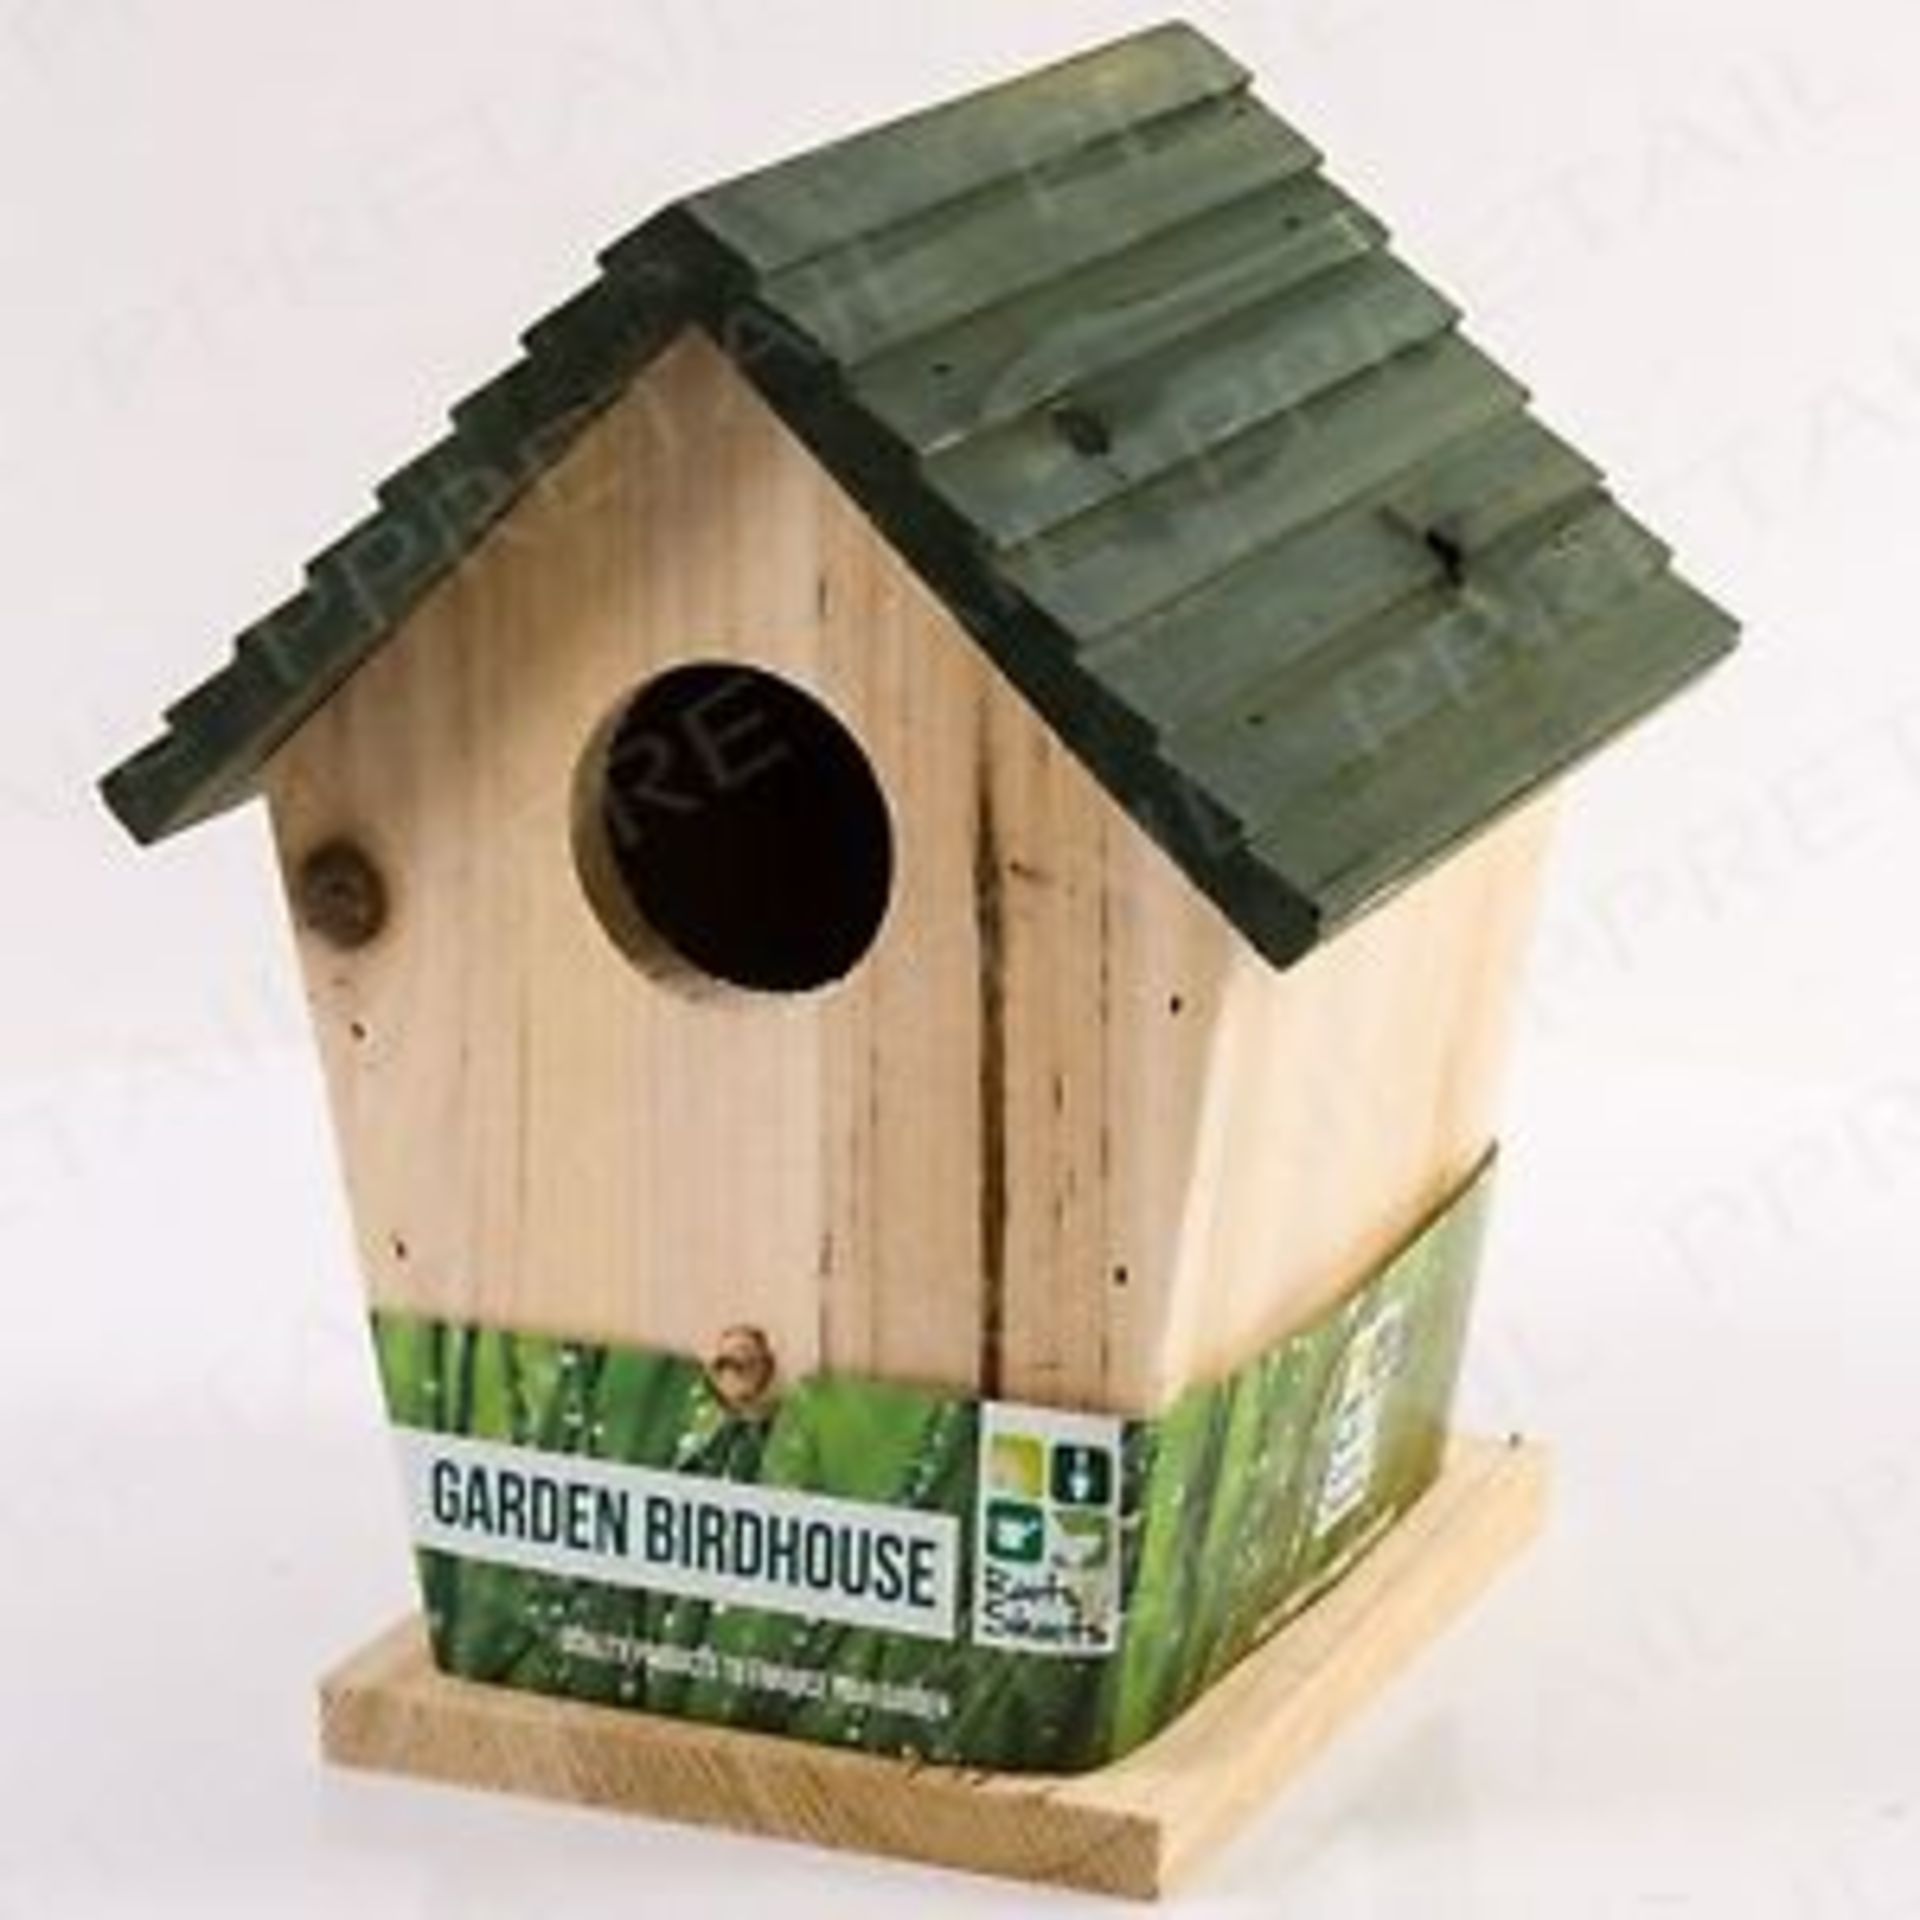 V *TRADE QTY* Brand New Wooden Birdhouse With Pitched Roof And Perch X 10 YOUR BID PRICE TO BE